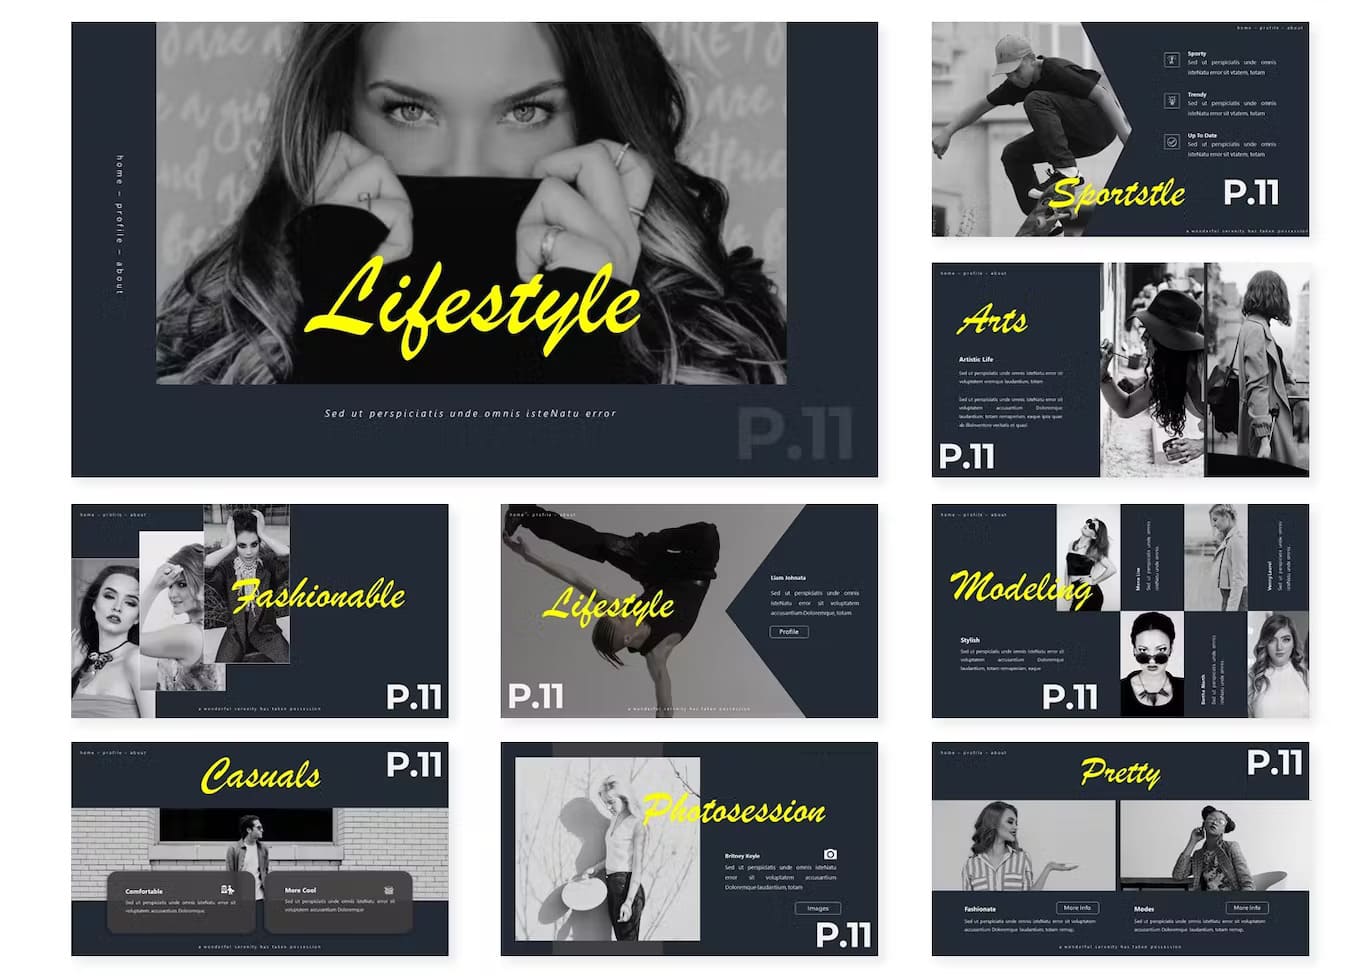 Natureals of Lifestyle powerpoint template.